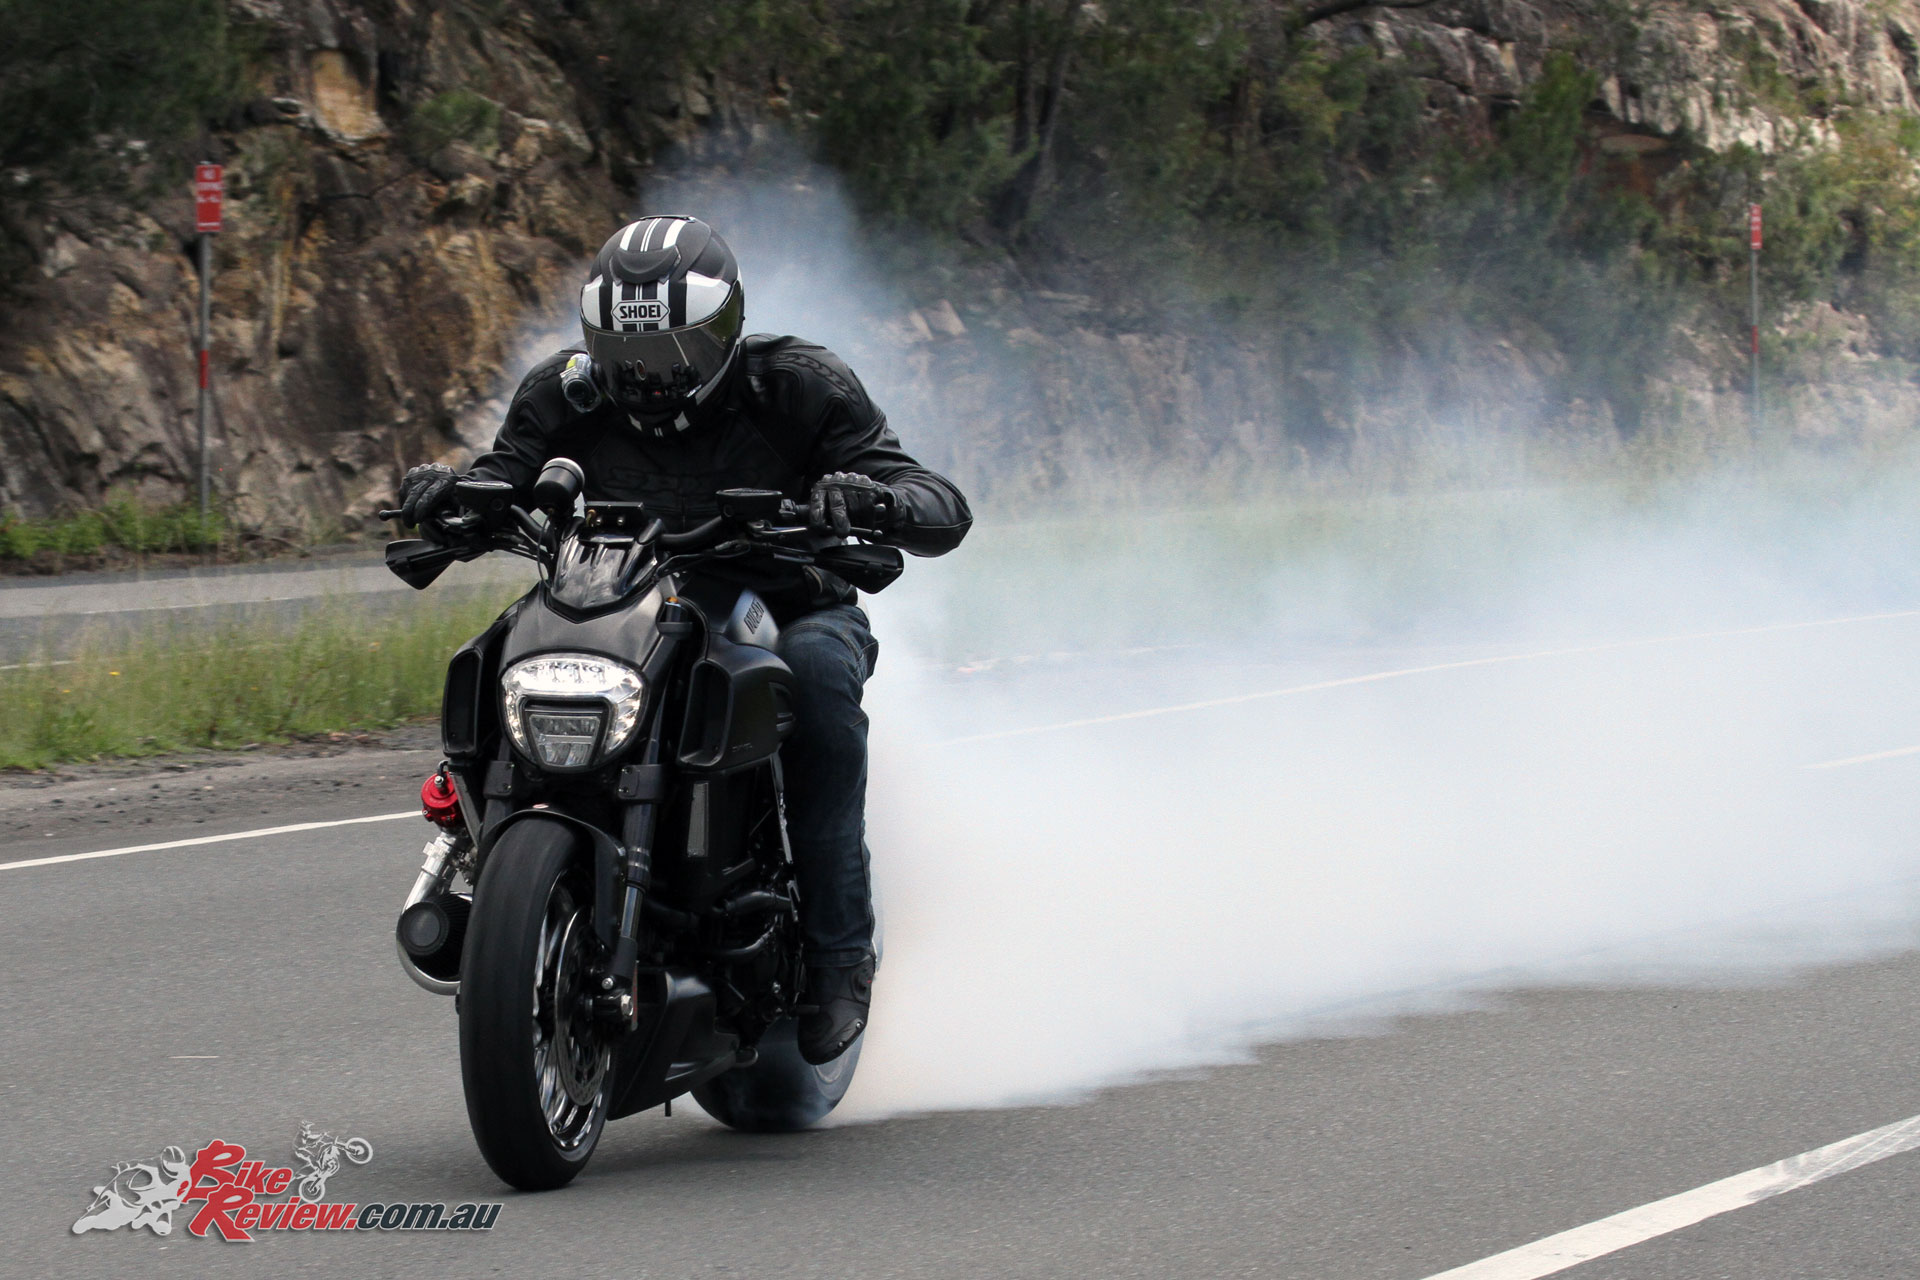 Plenty of torque on offer there, and the Diavel is so slouch to start with!